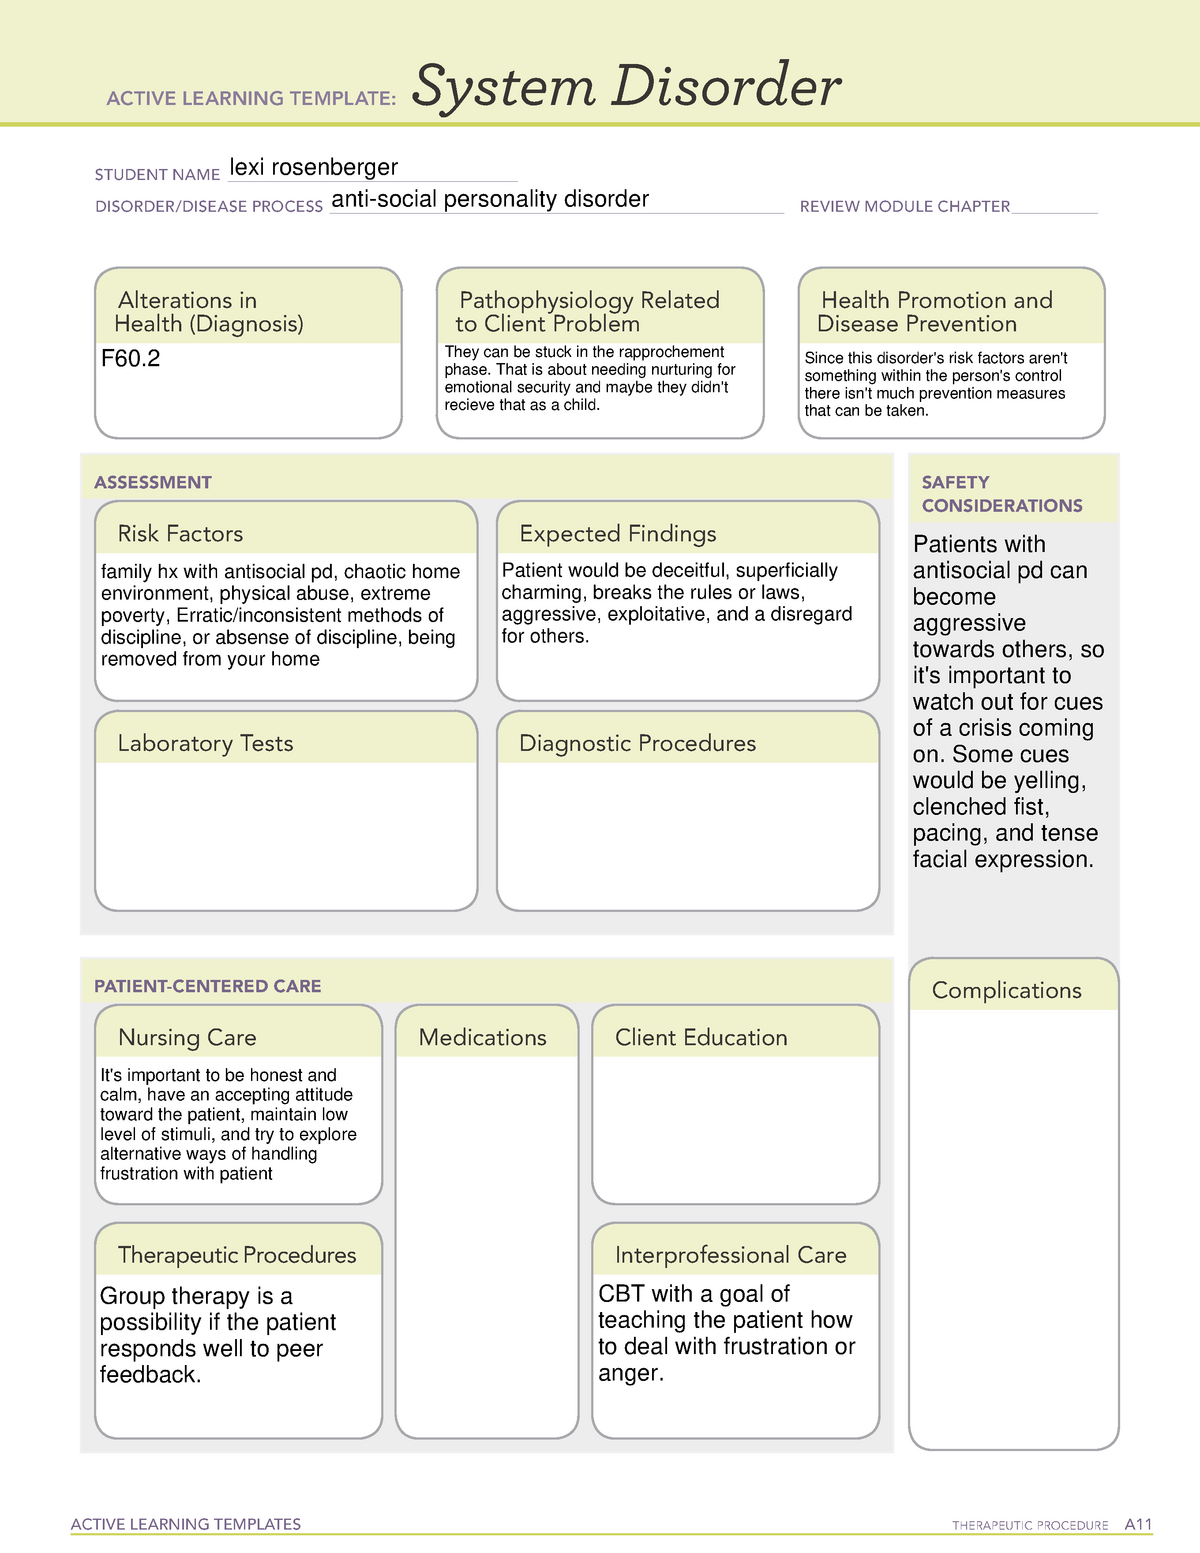 Antisocial Personality Disorder ACTIVE LEARNING TEMPLATES THERAPEUTIC PROCEDURE A System